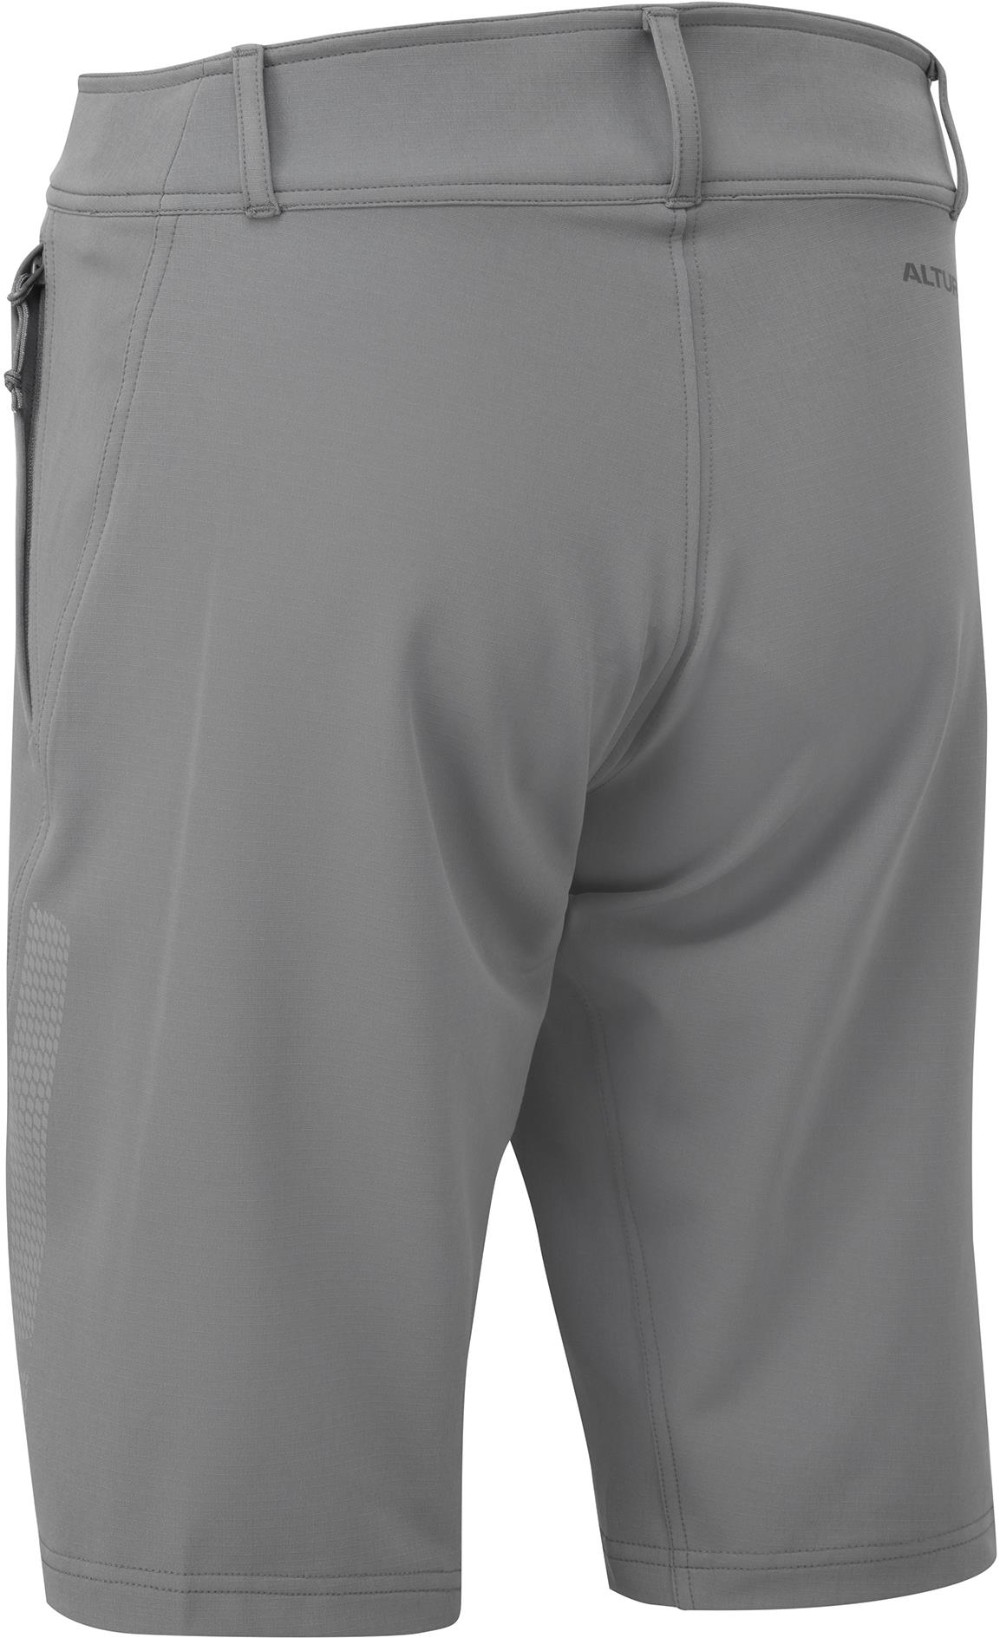 All Roads Repel Womens Shorts image 1